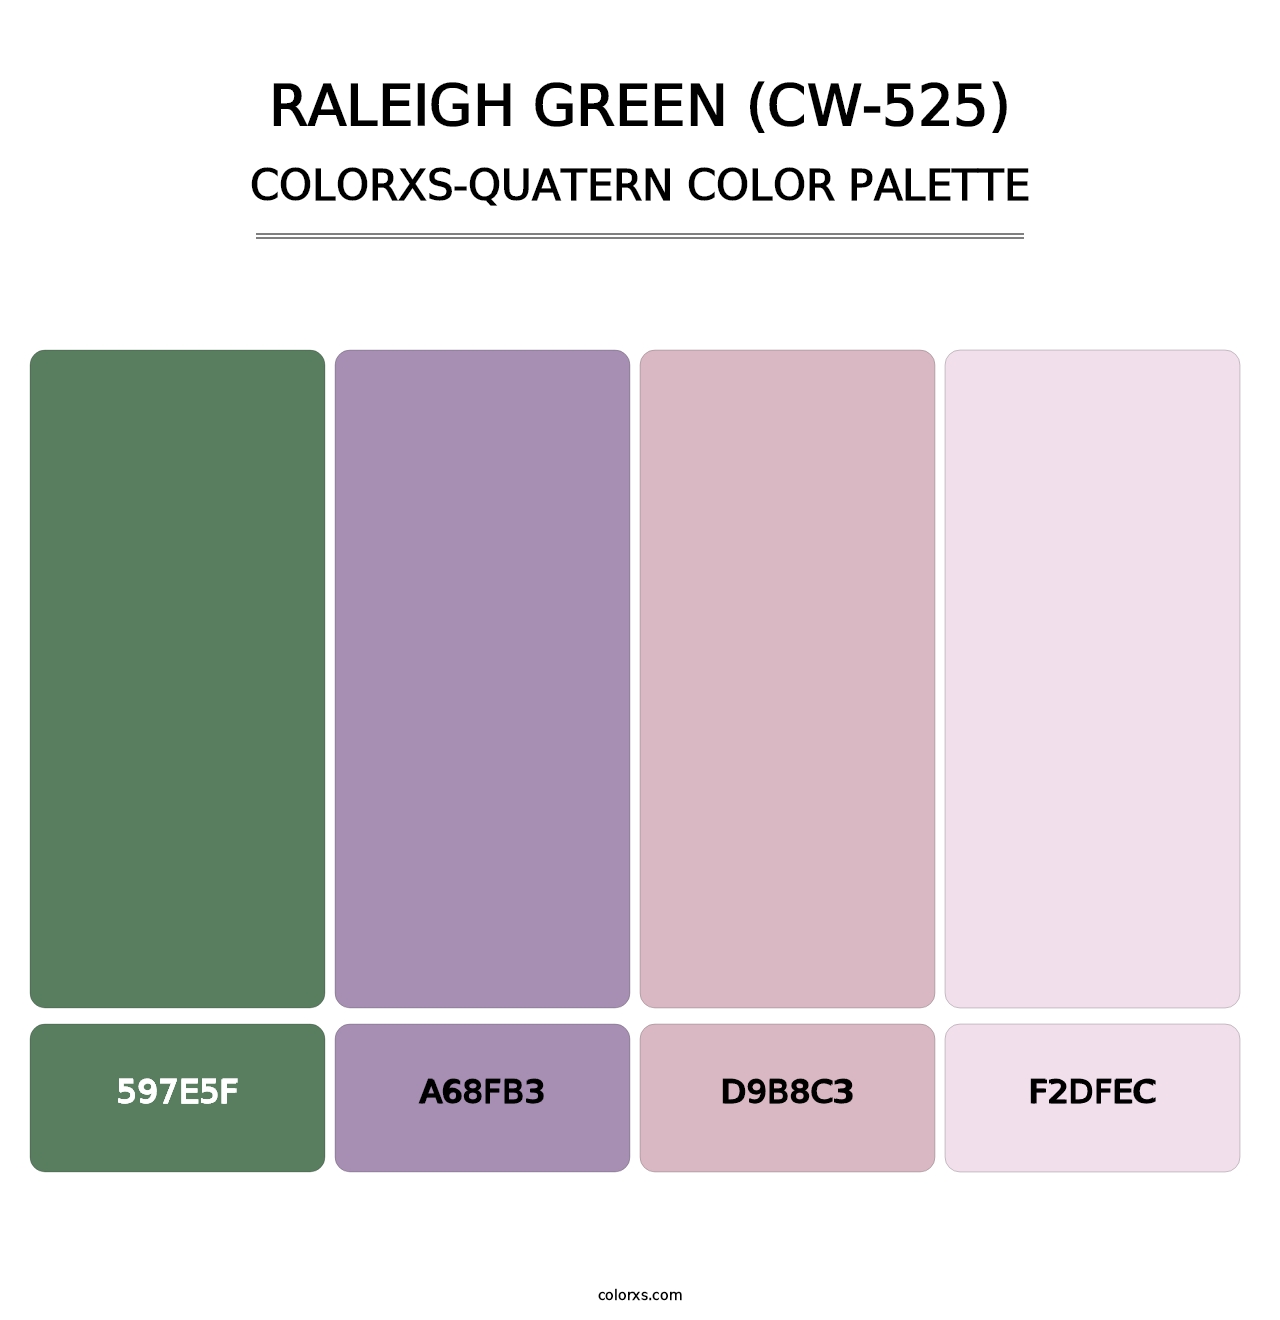 Raleigh Green (CW-525) - Colorxs Quatern Palette